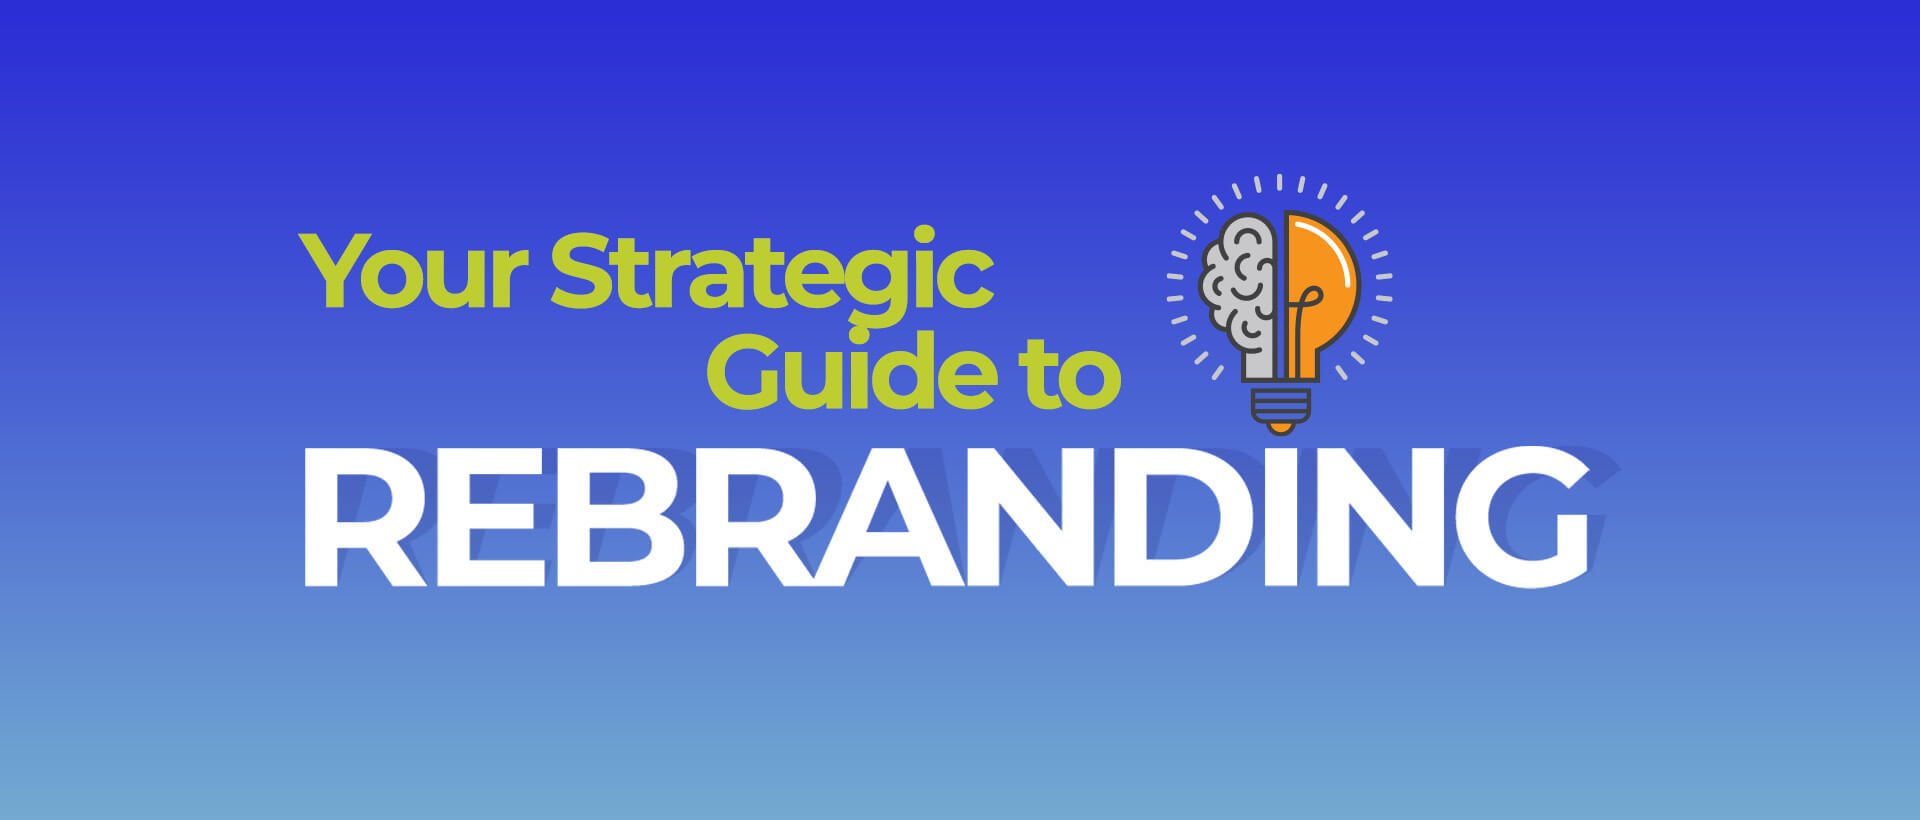 Your Strategic Guide to Rebranding